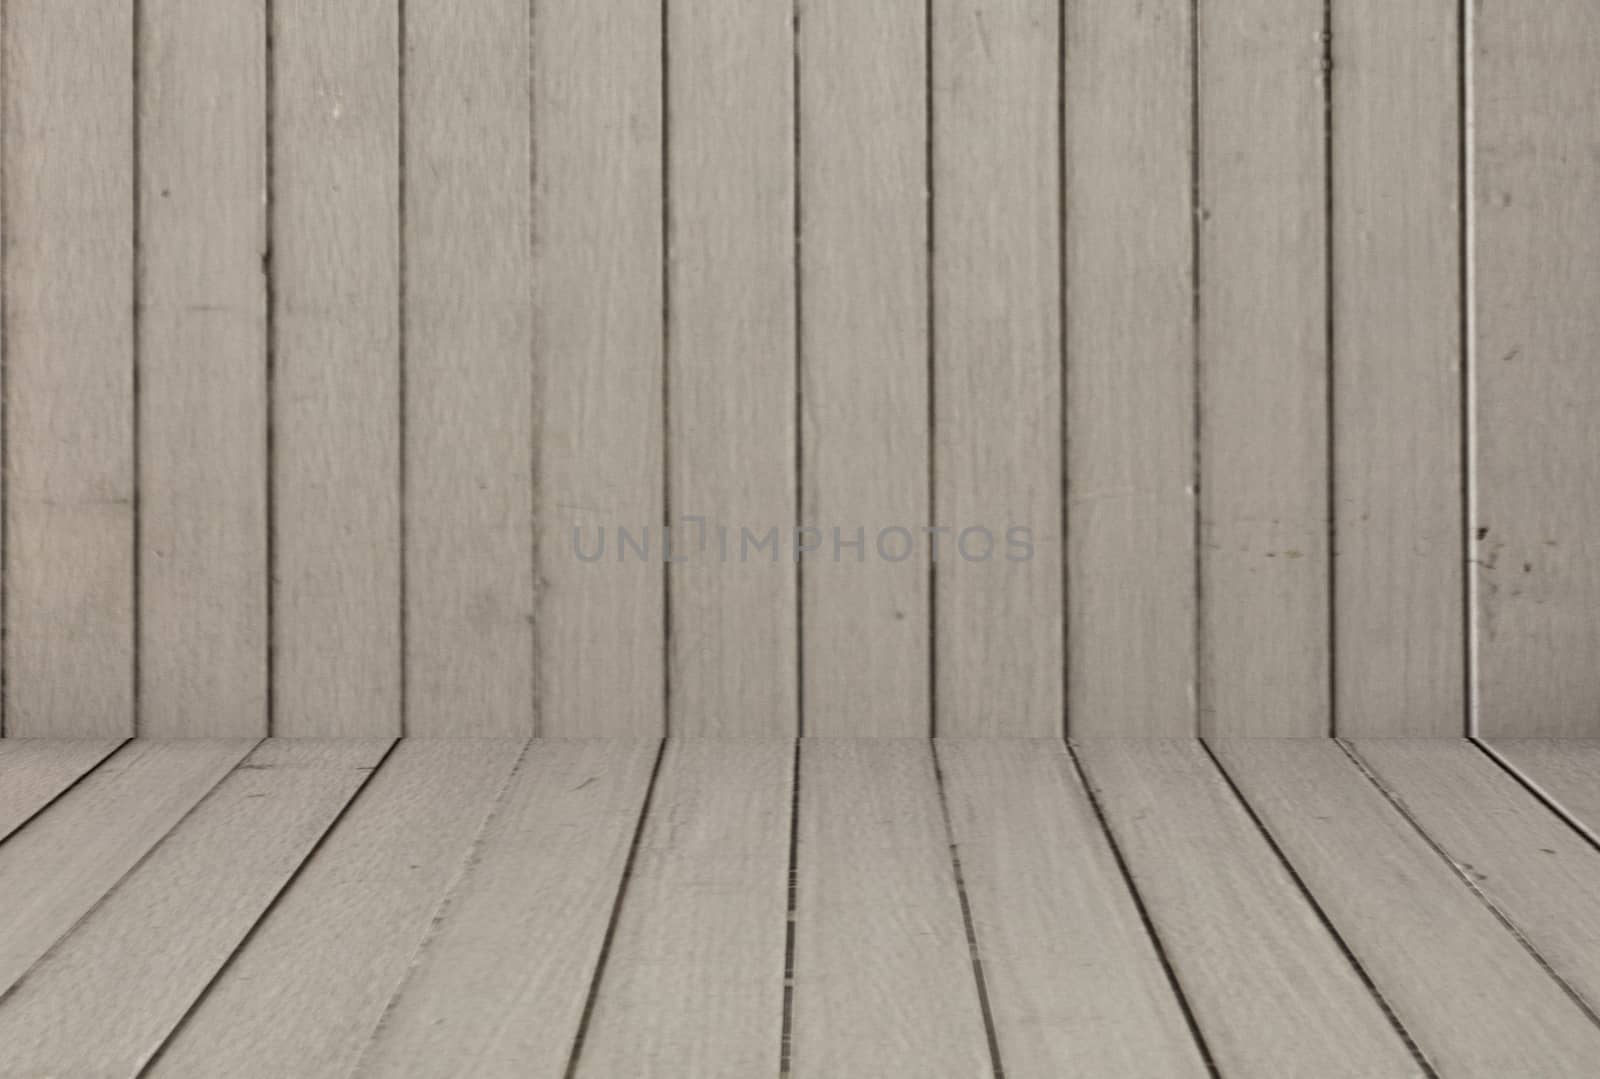 Wood texture background 